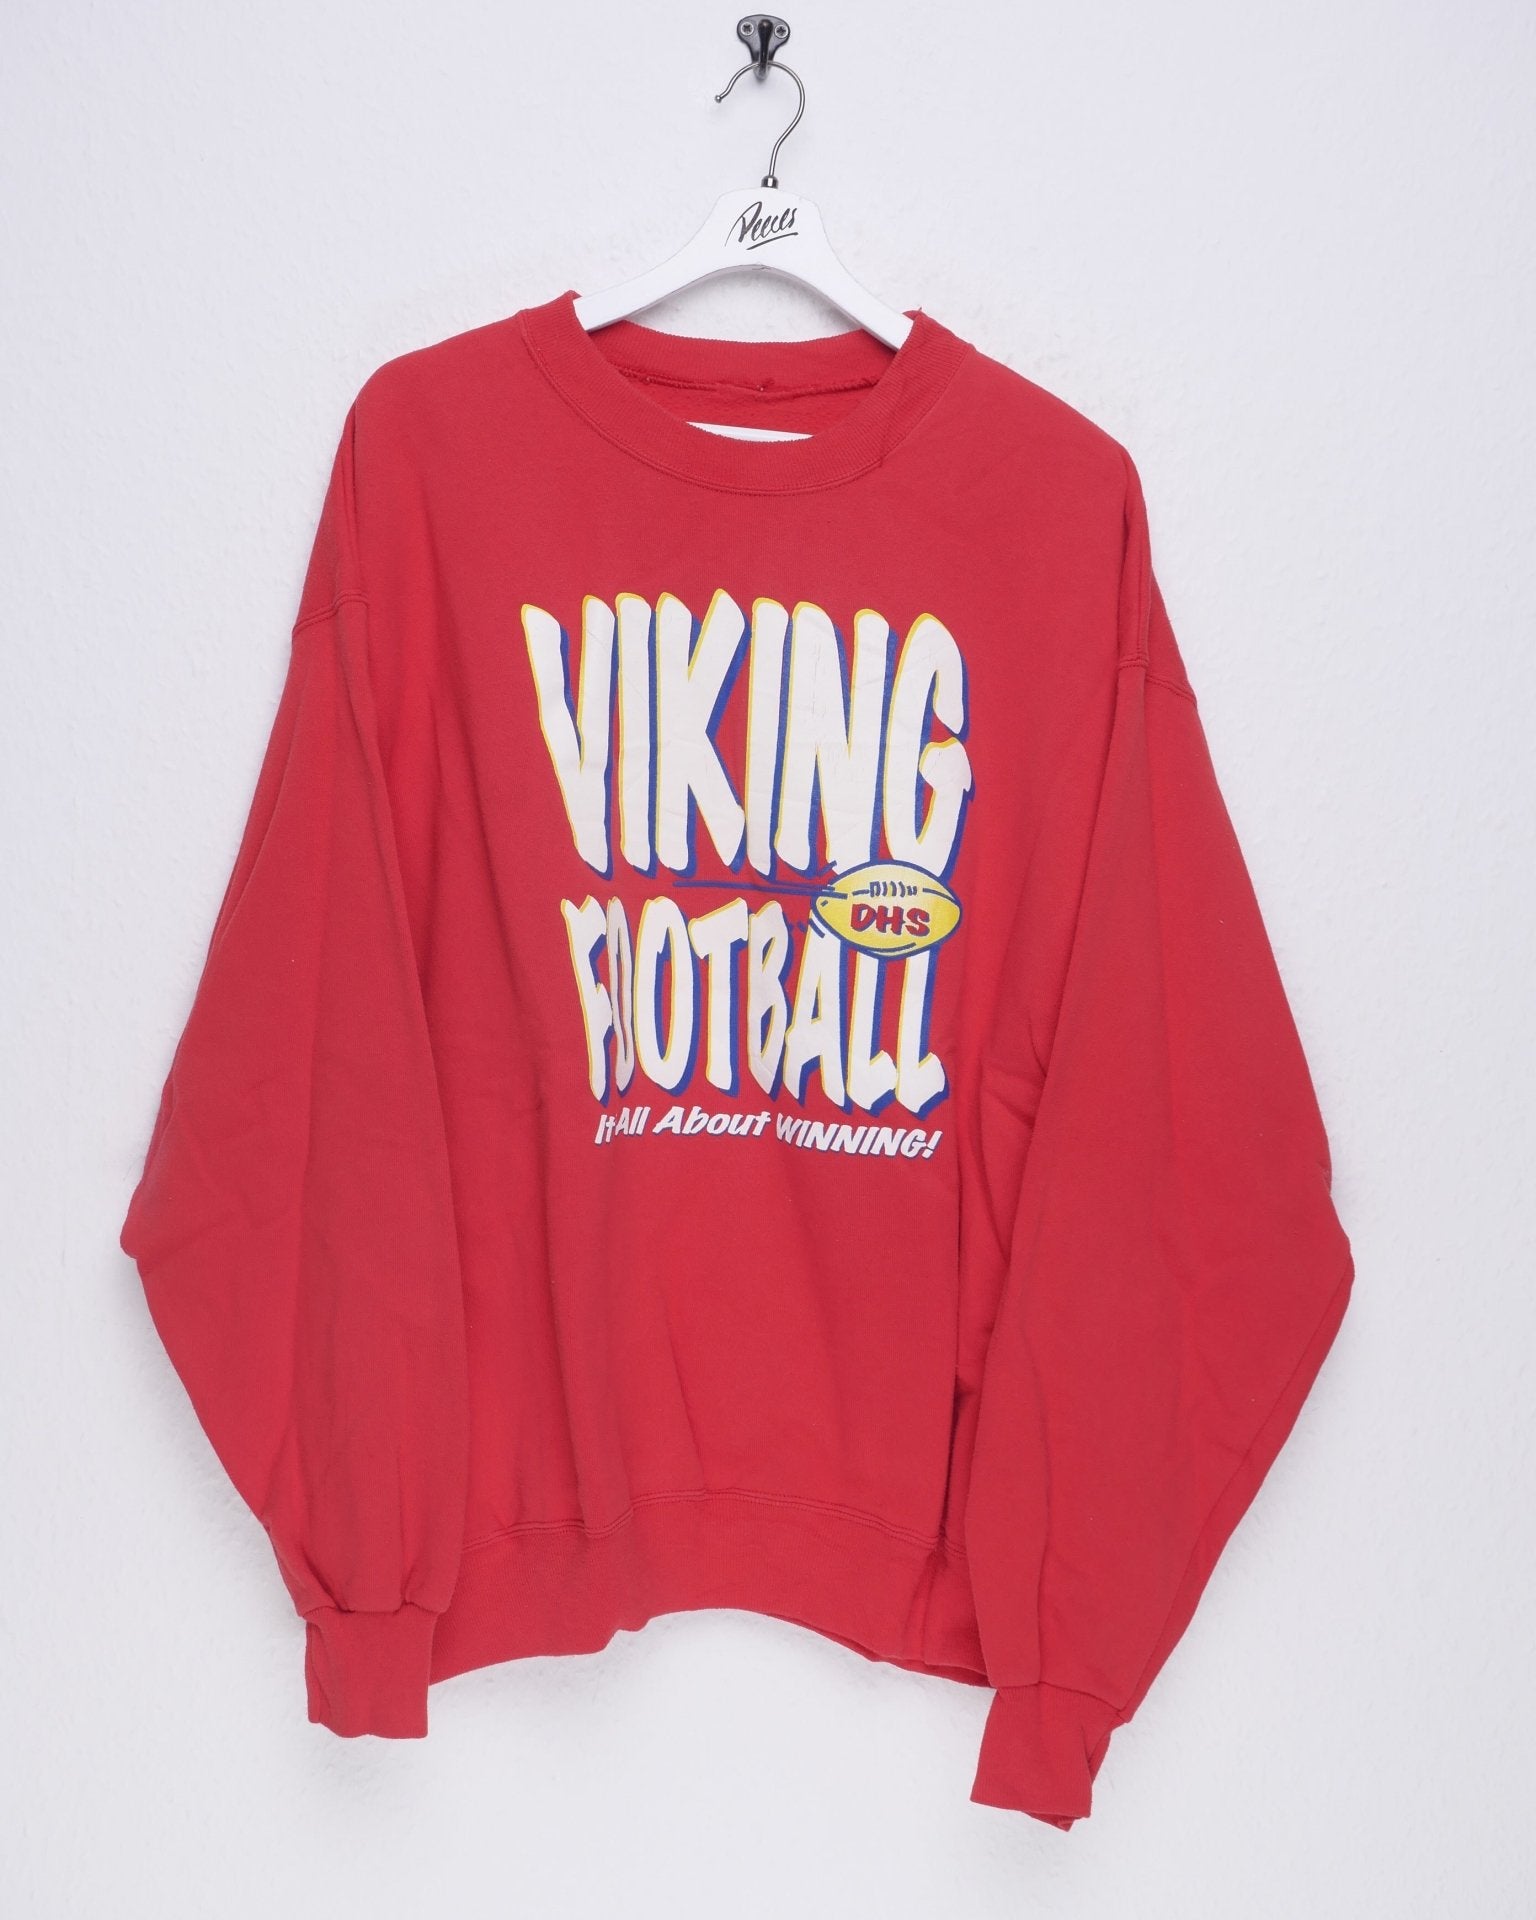 Viking Football printed Spellout Vintage Sweater - Peeces